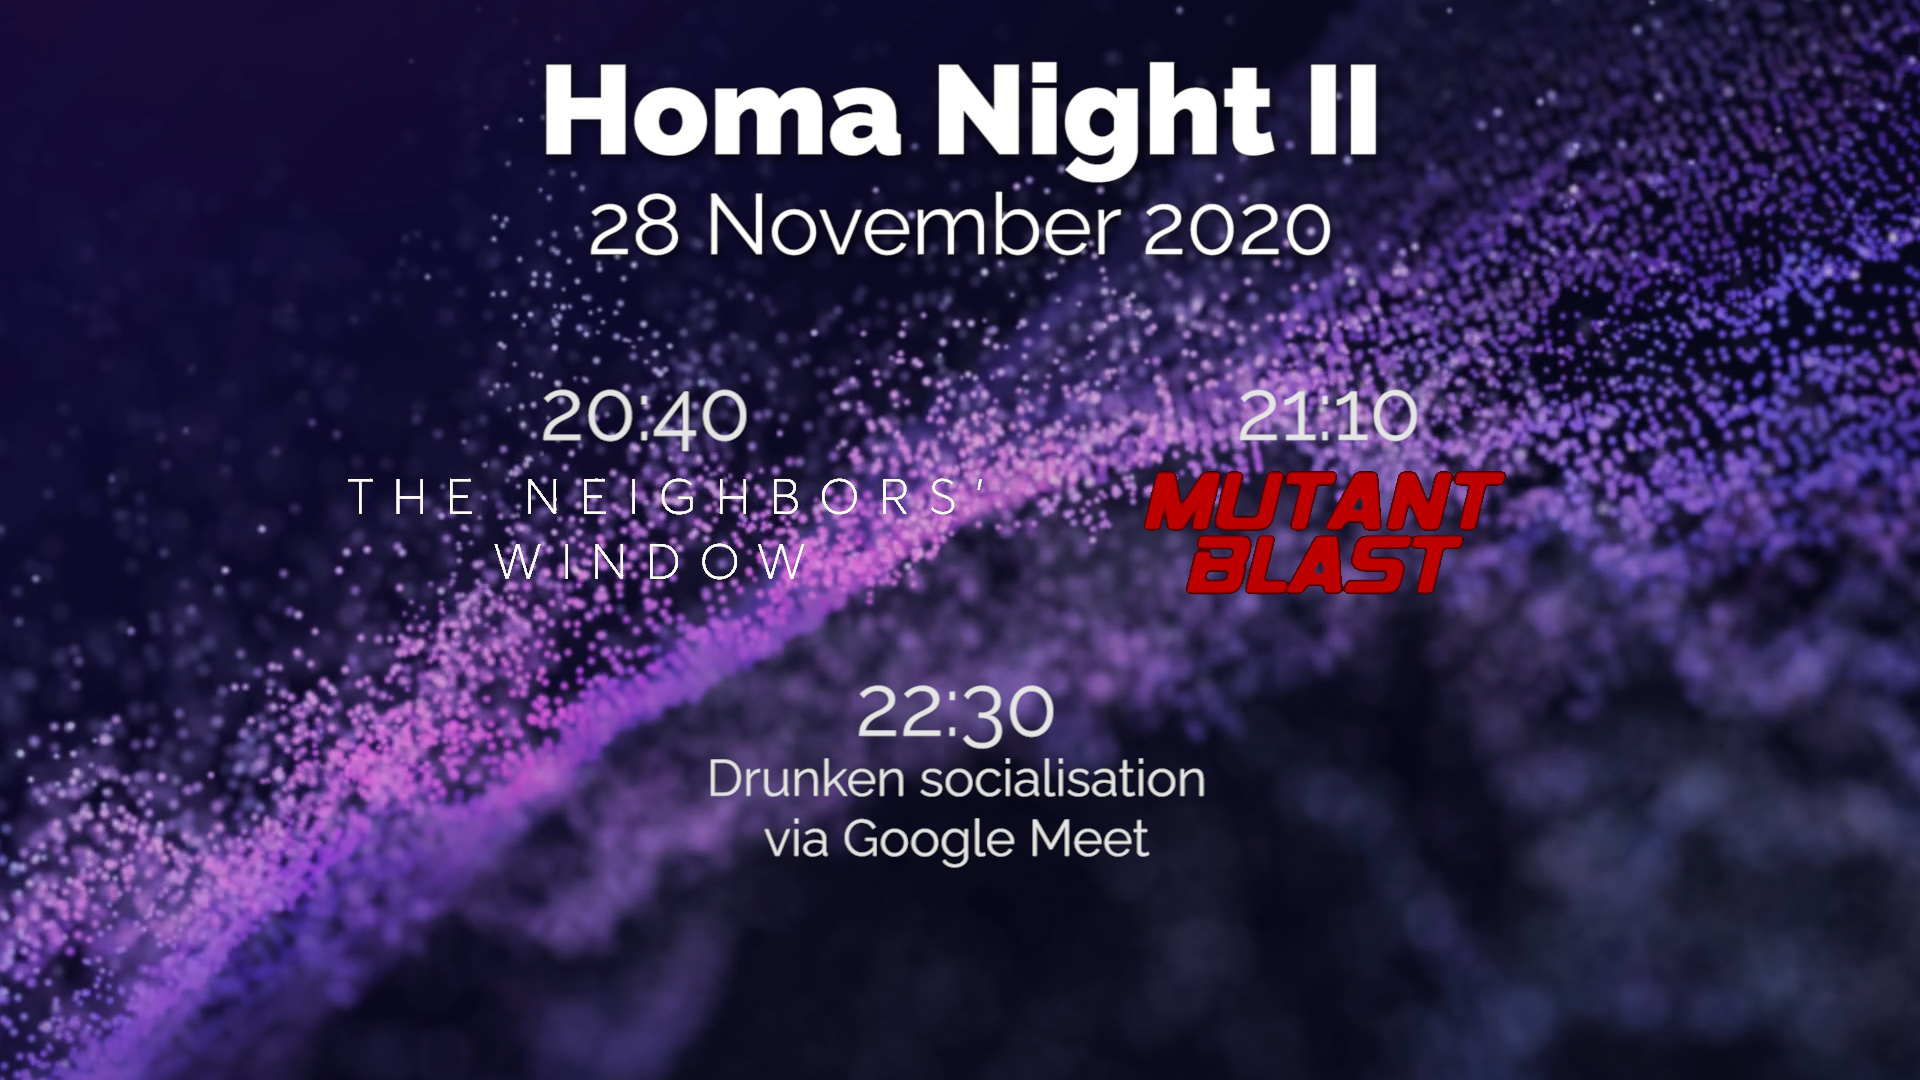 We'll be watching The Neighbors' Window at 20:40, then - after an intermission - Mutant Blast at 21:10. From 22:30 a Google Meet chat room will be available for social videochatting.